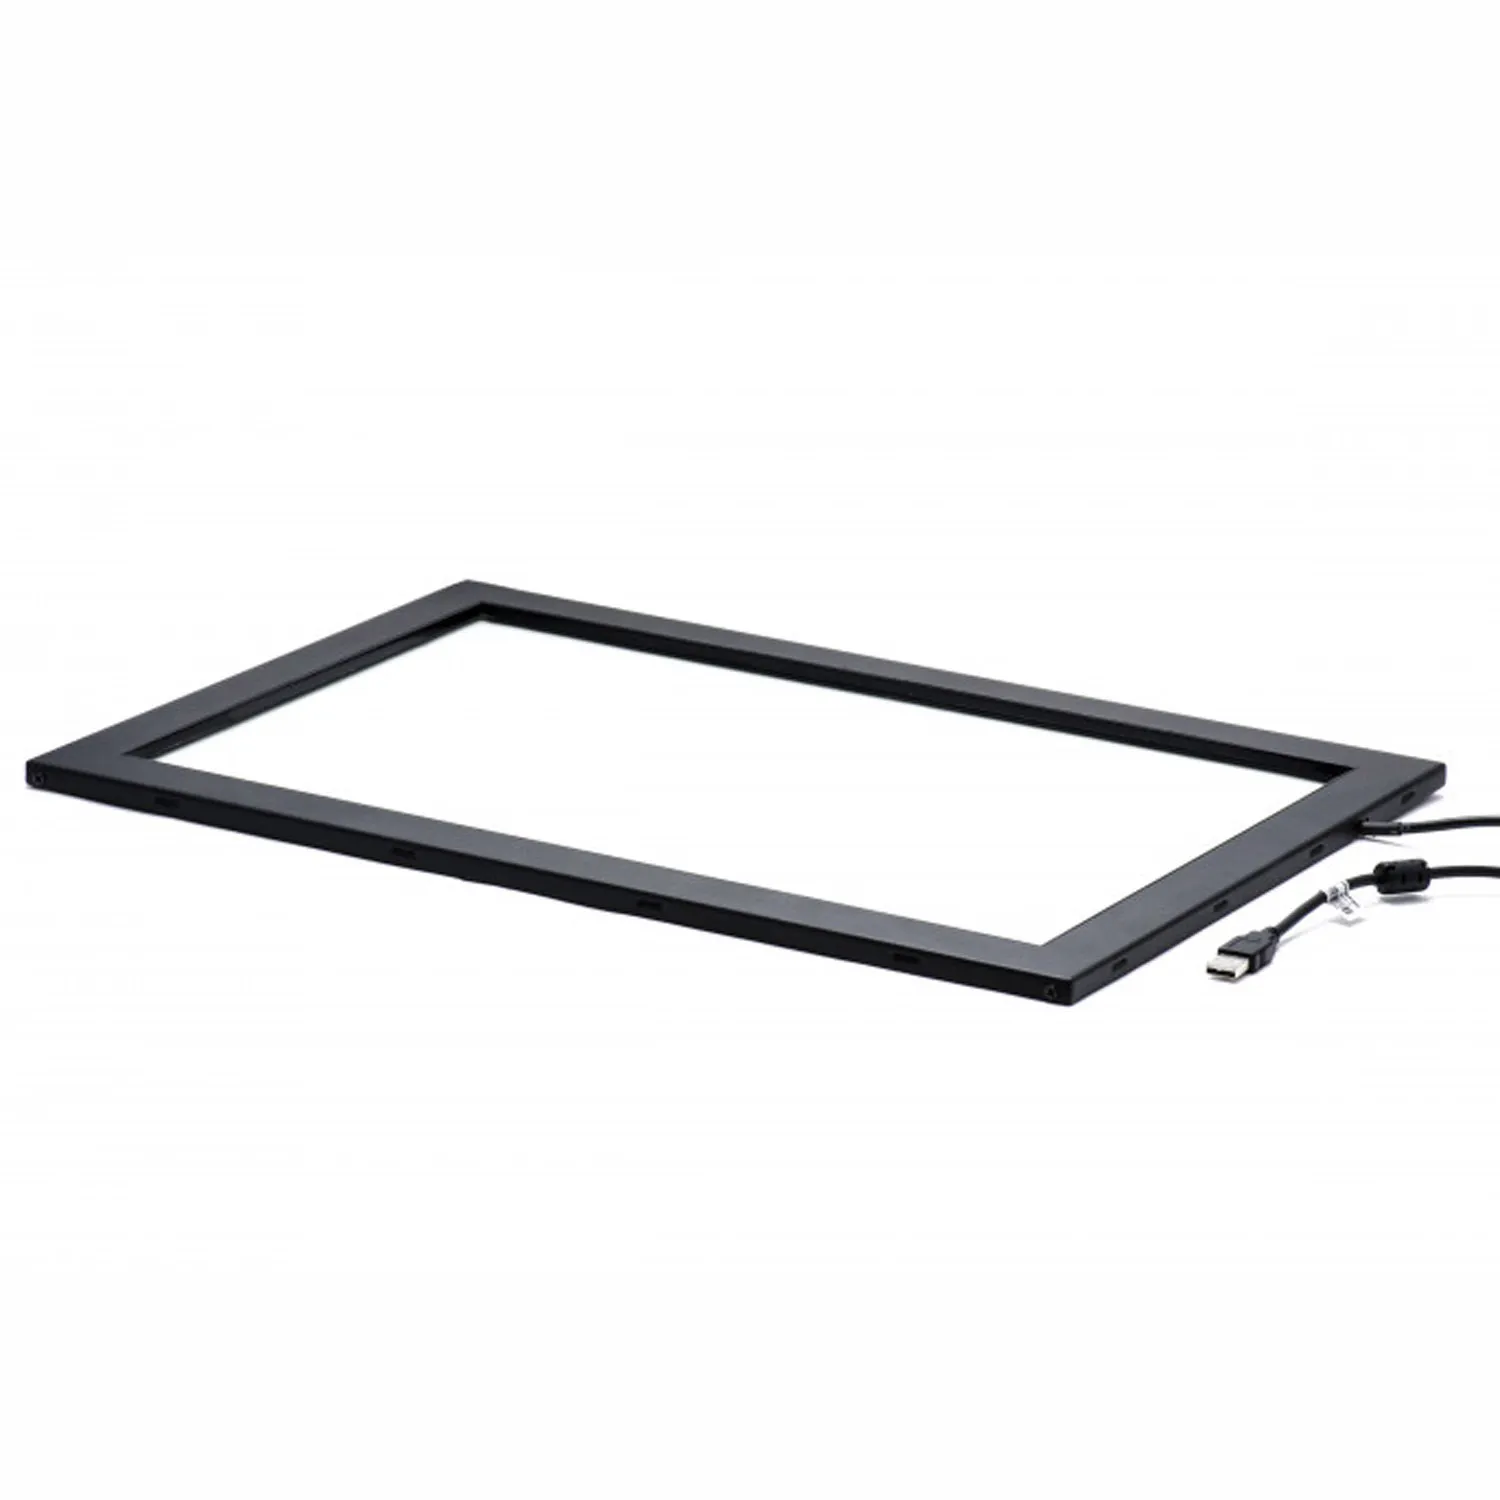 Touch Screen Keetouch GmbH 19" KP-190-IW2S0G2 frame with glass 